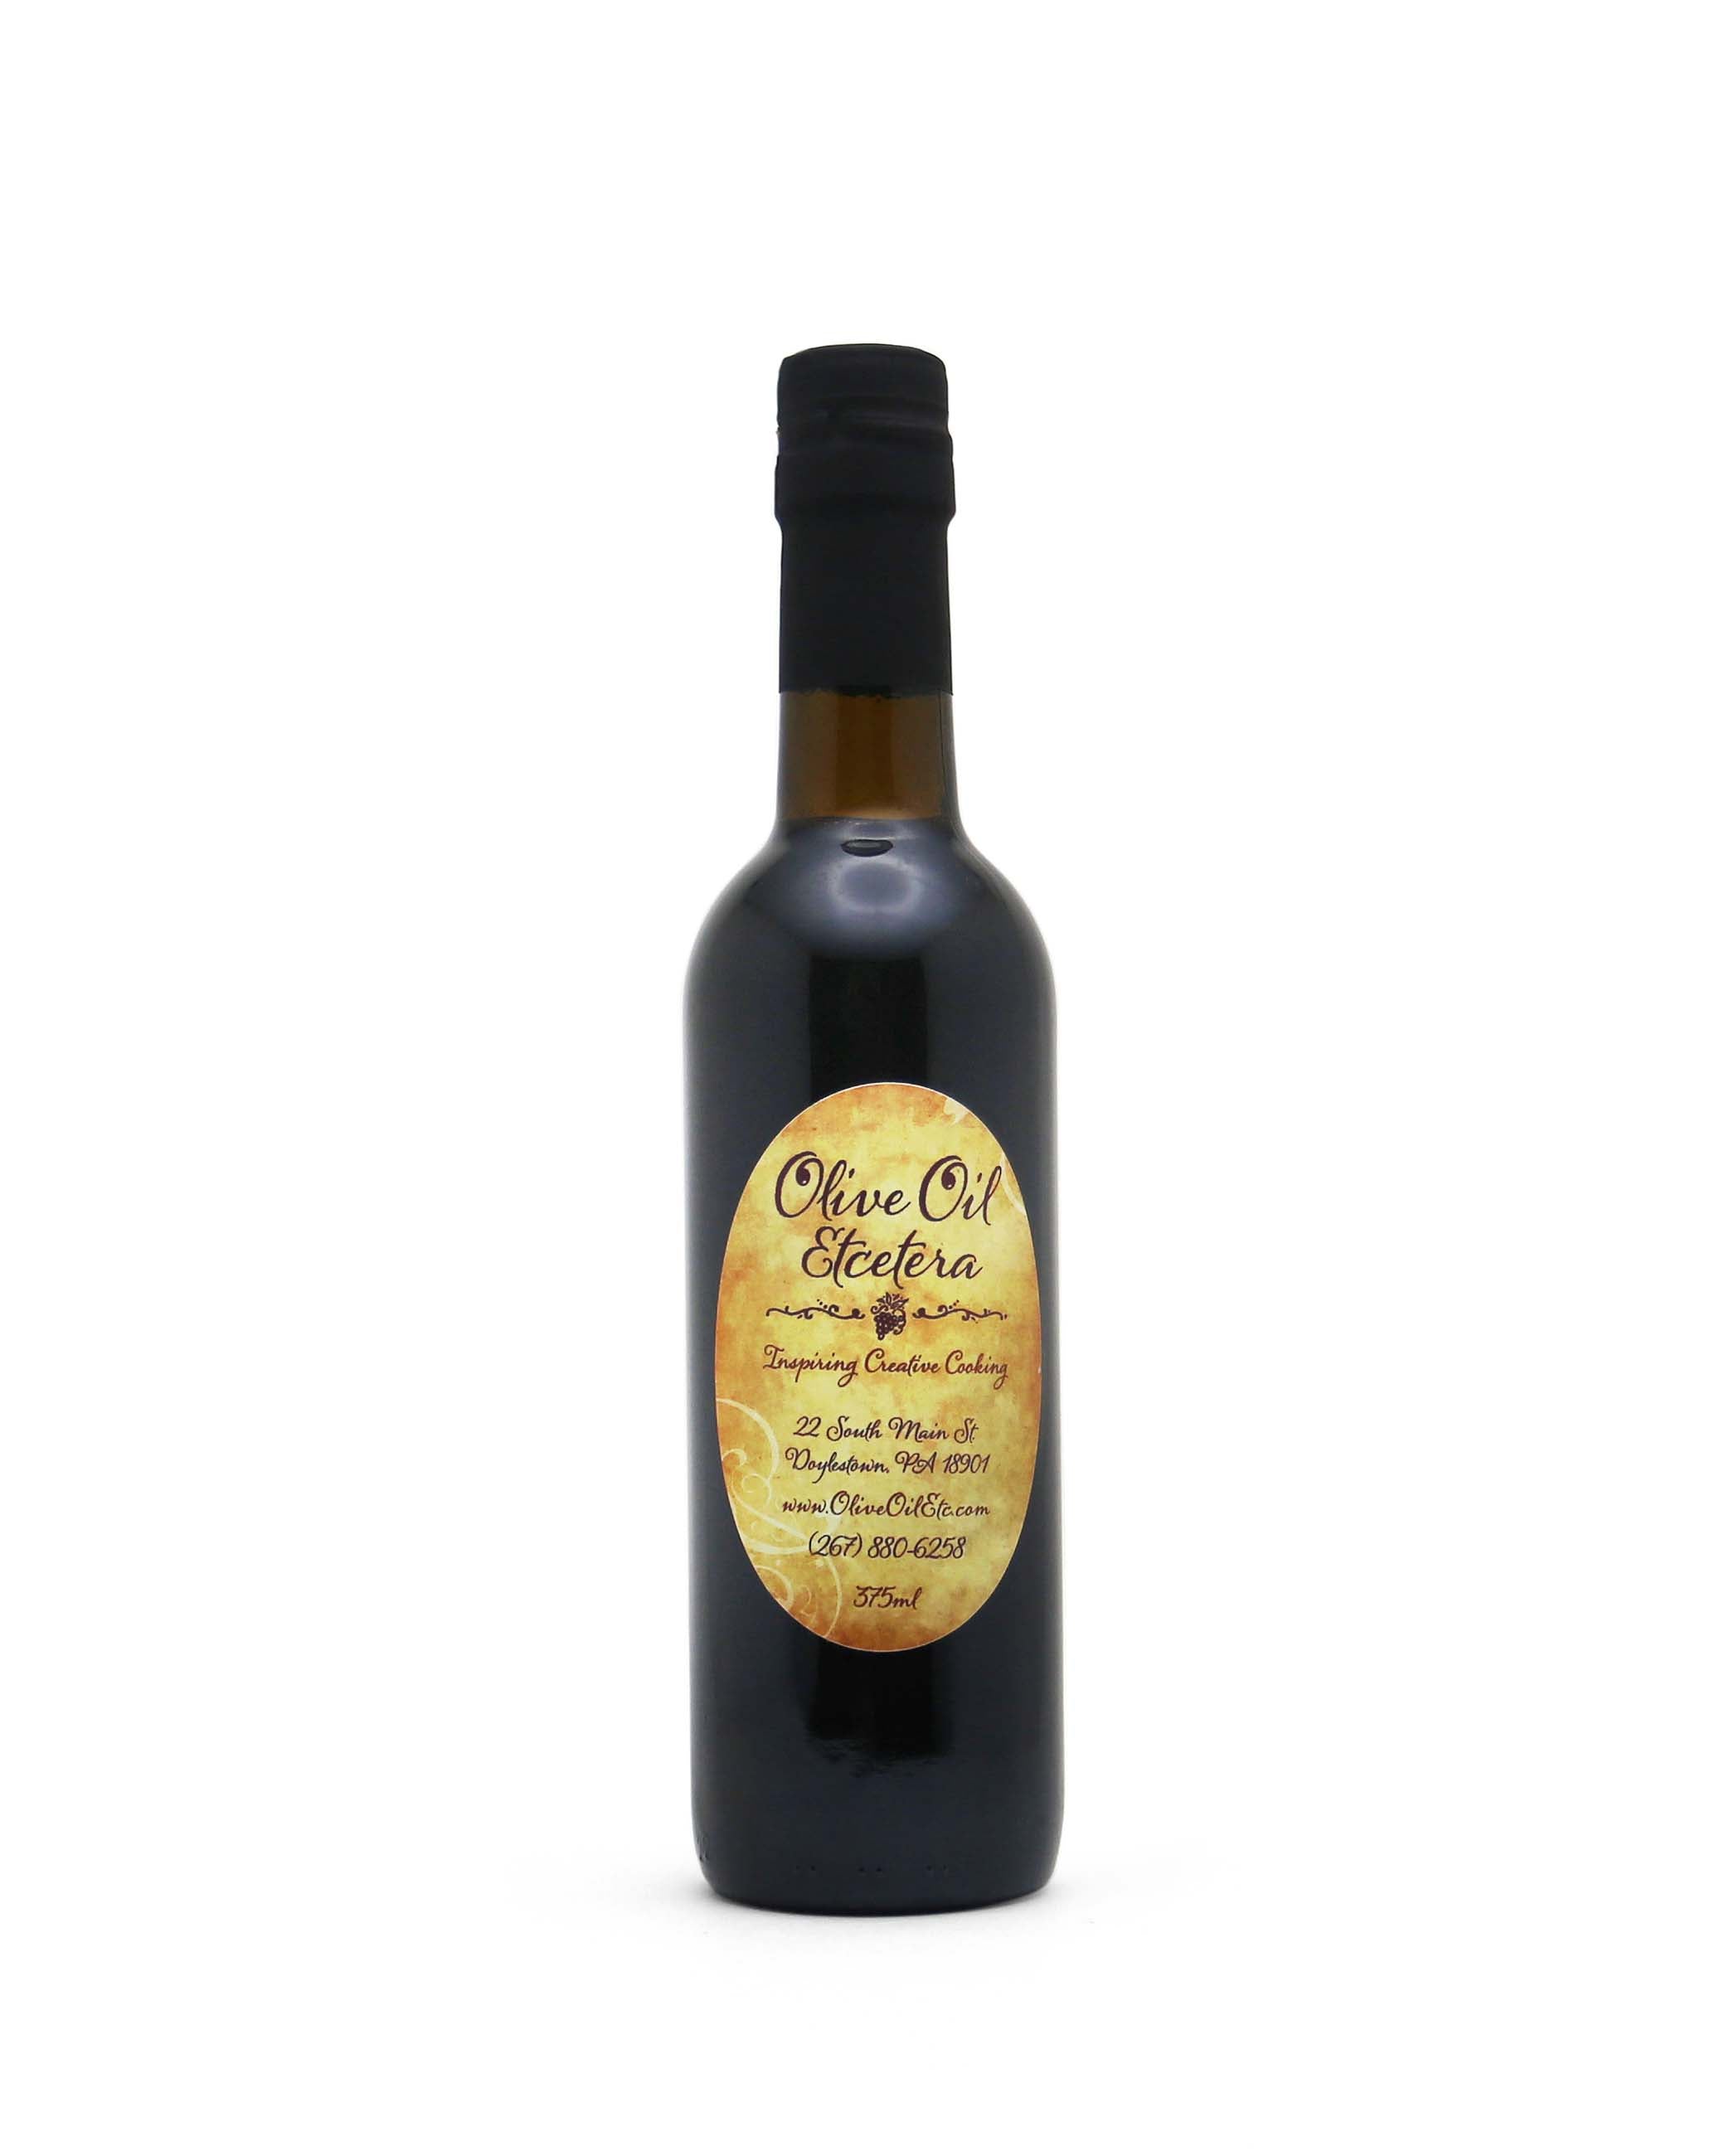 Bottle of the Month Club - Olive Oil Etcetera 